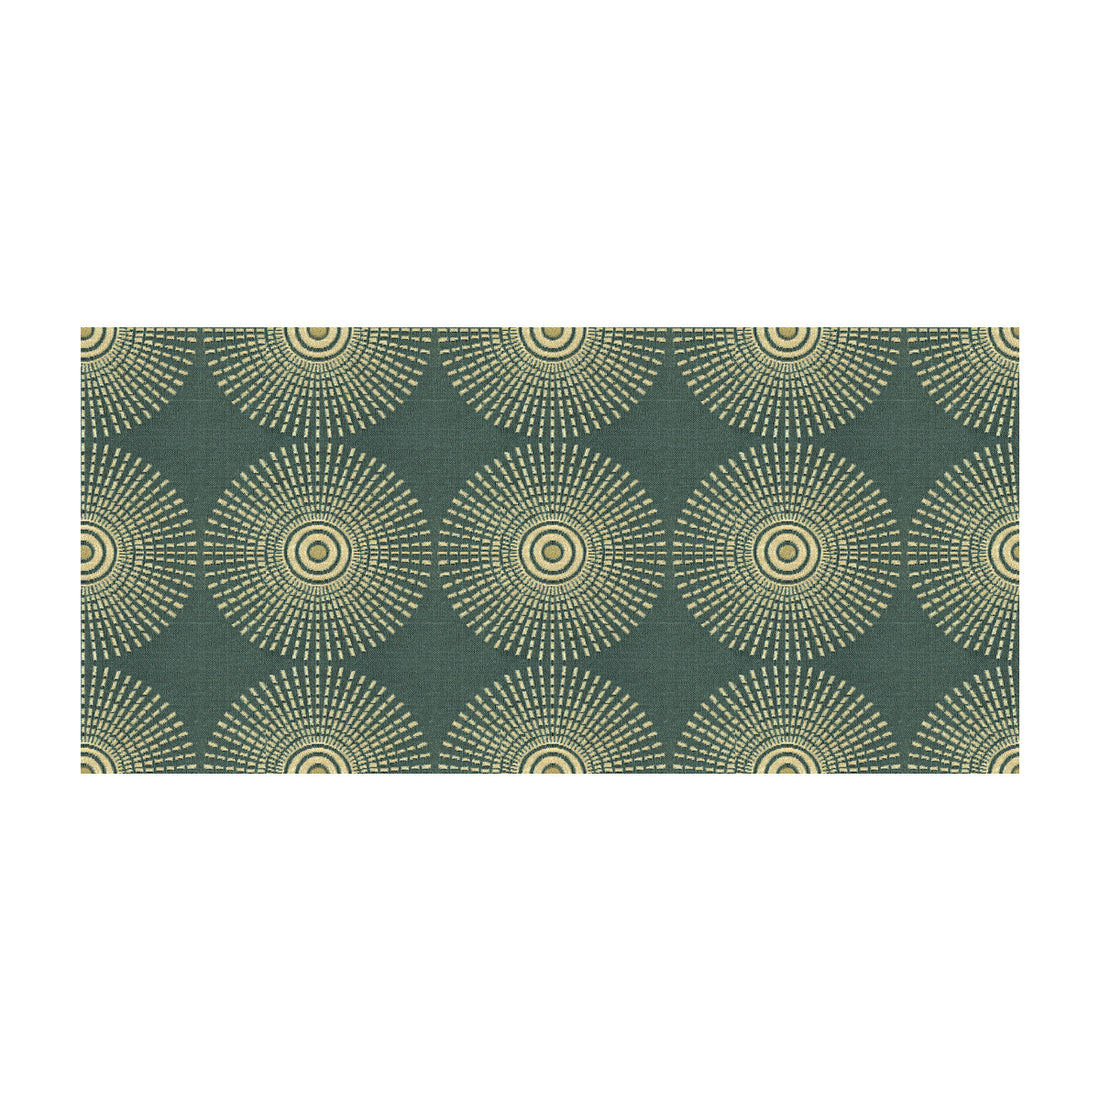 Solara fabric in mineral color - pattern 33641.5.0 - by Kravet Contract in the Jonathan Adler Clarity collection